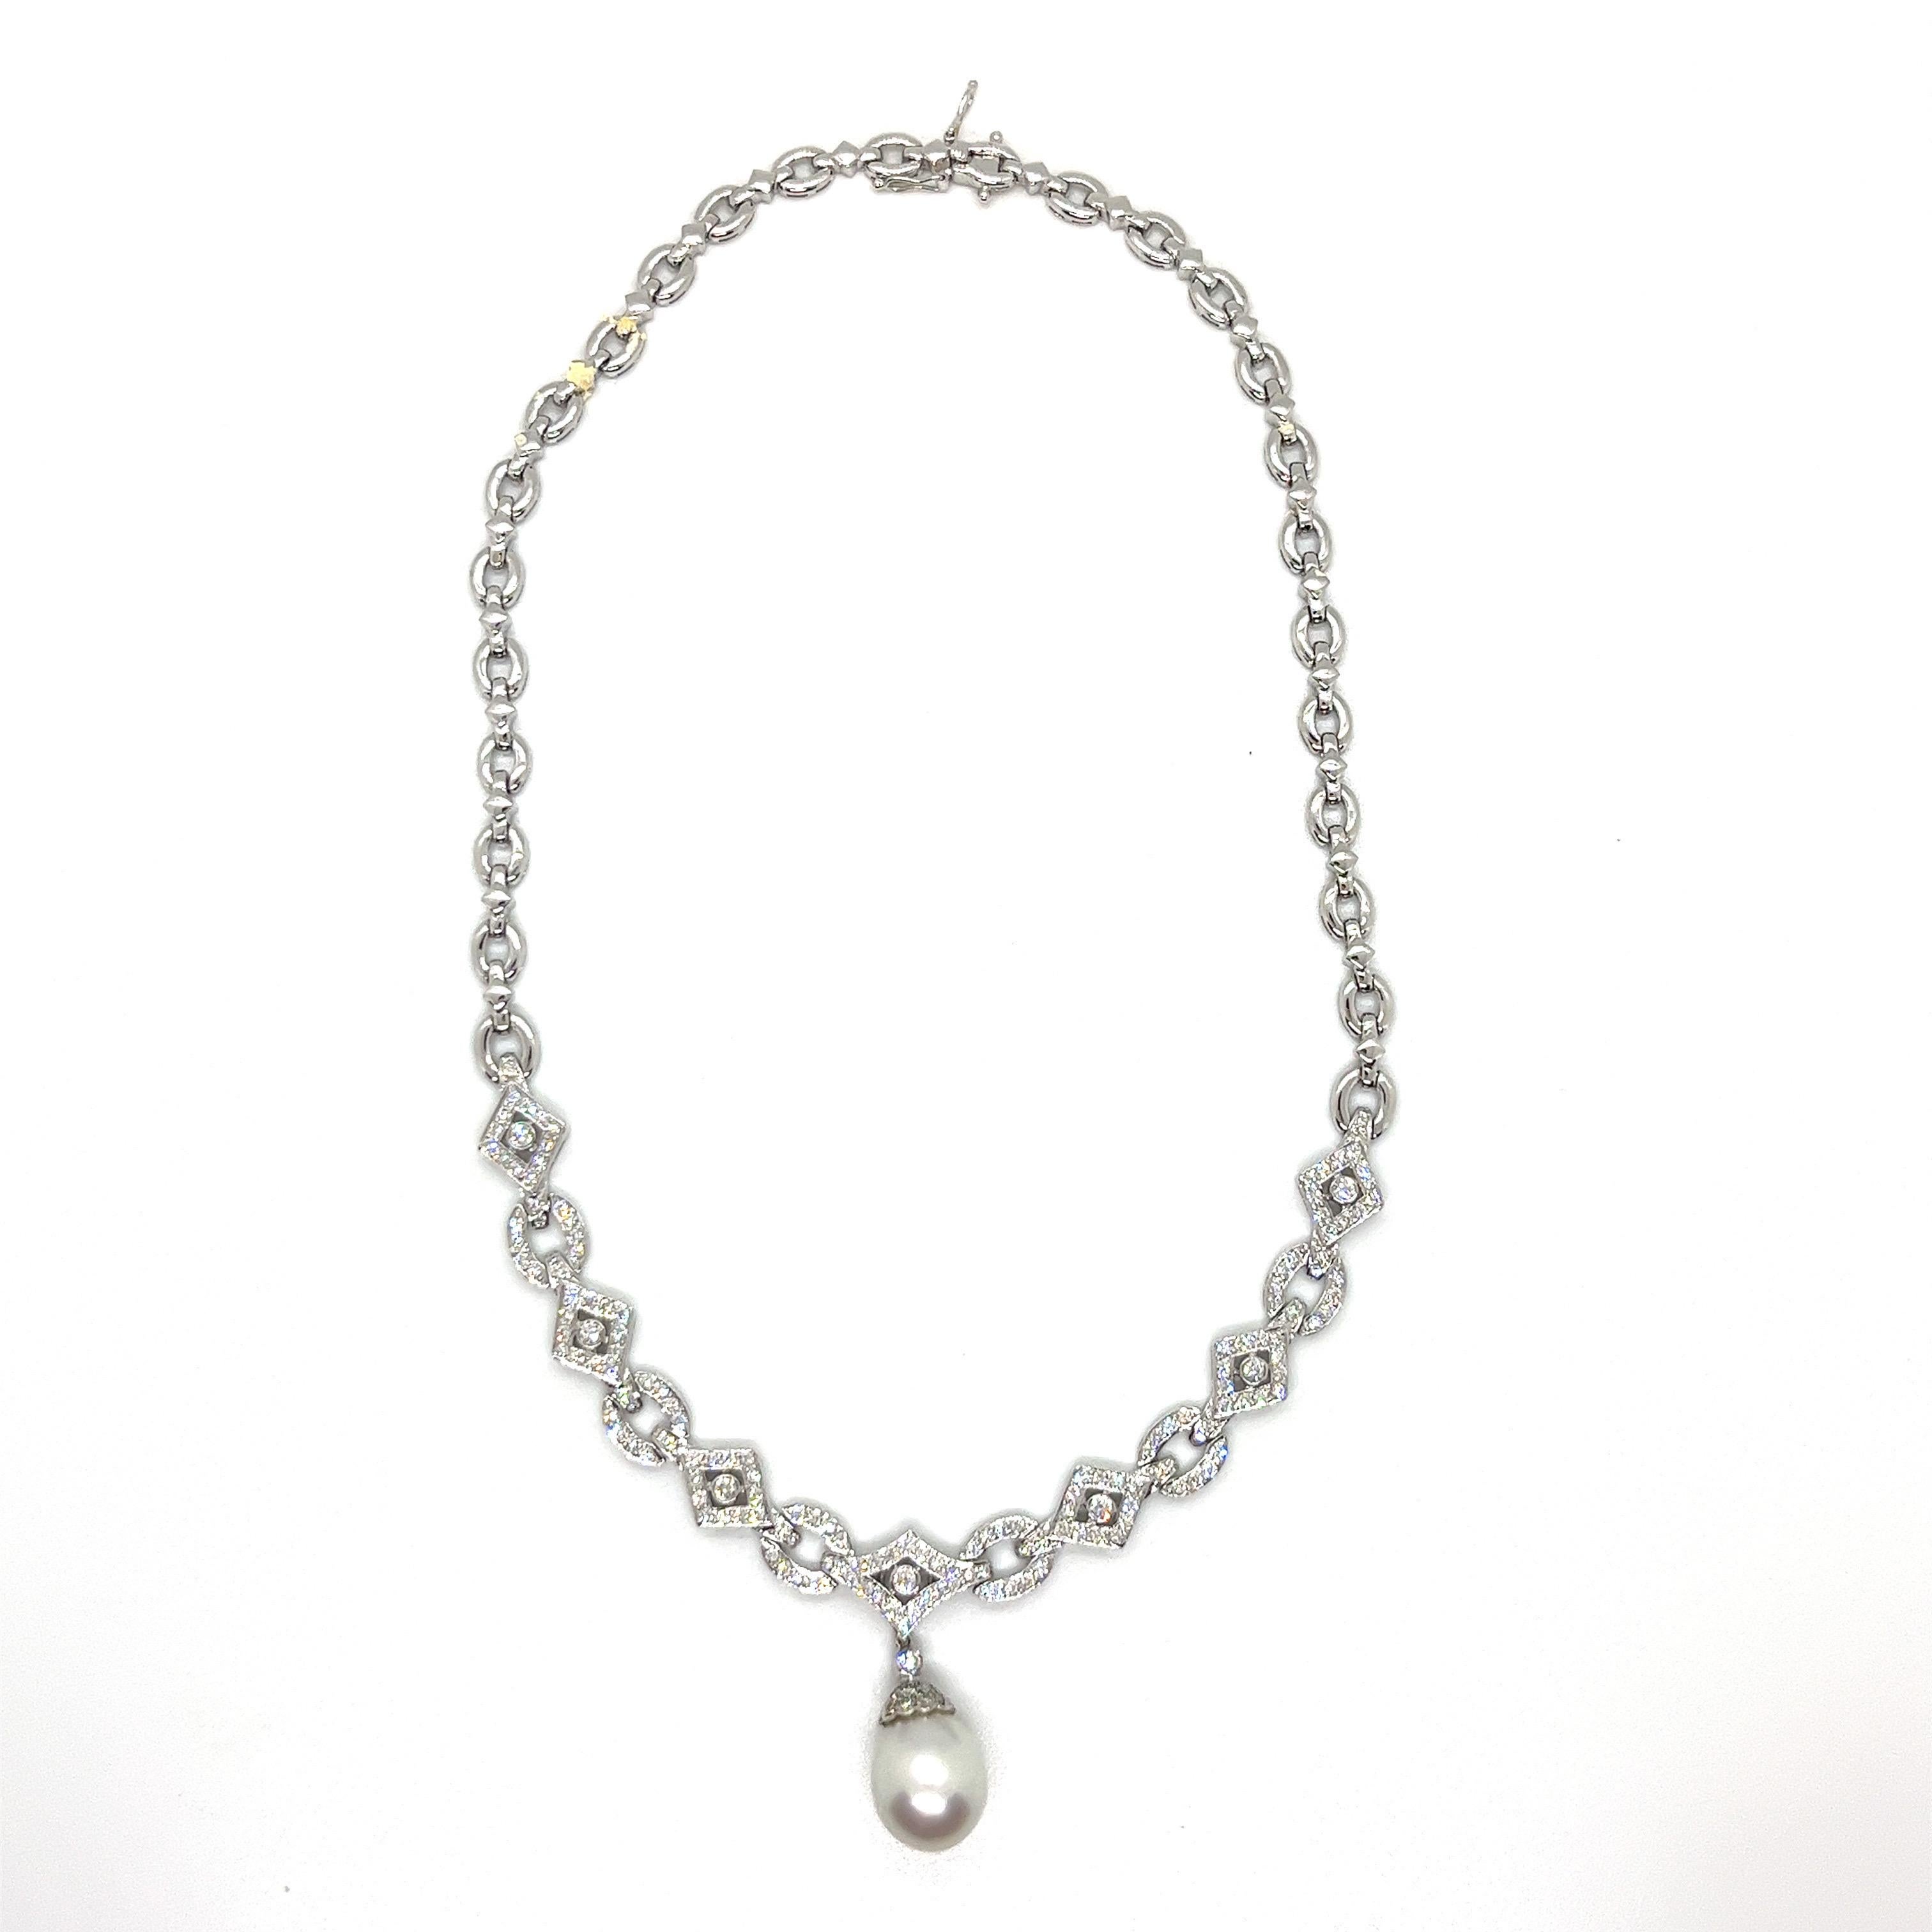 This extraordinary necklace is a true celebration of nature's most exquisite treasures, expertly crafted in luxurious 18K white gold and adorned with dazzling diamonds and a magnificent South Sea pearl. Every aspect of this piece exudes unparalleled